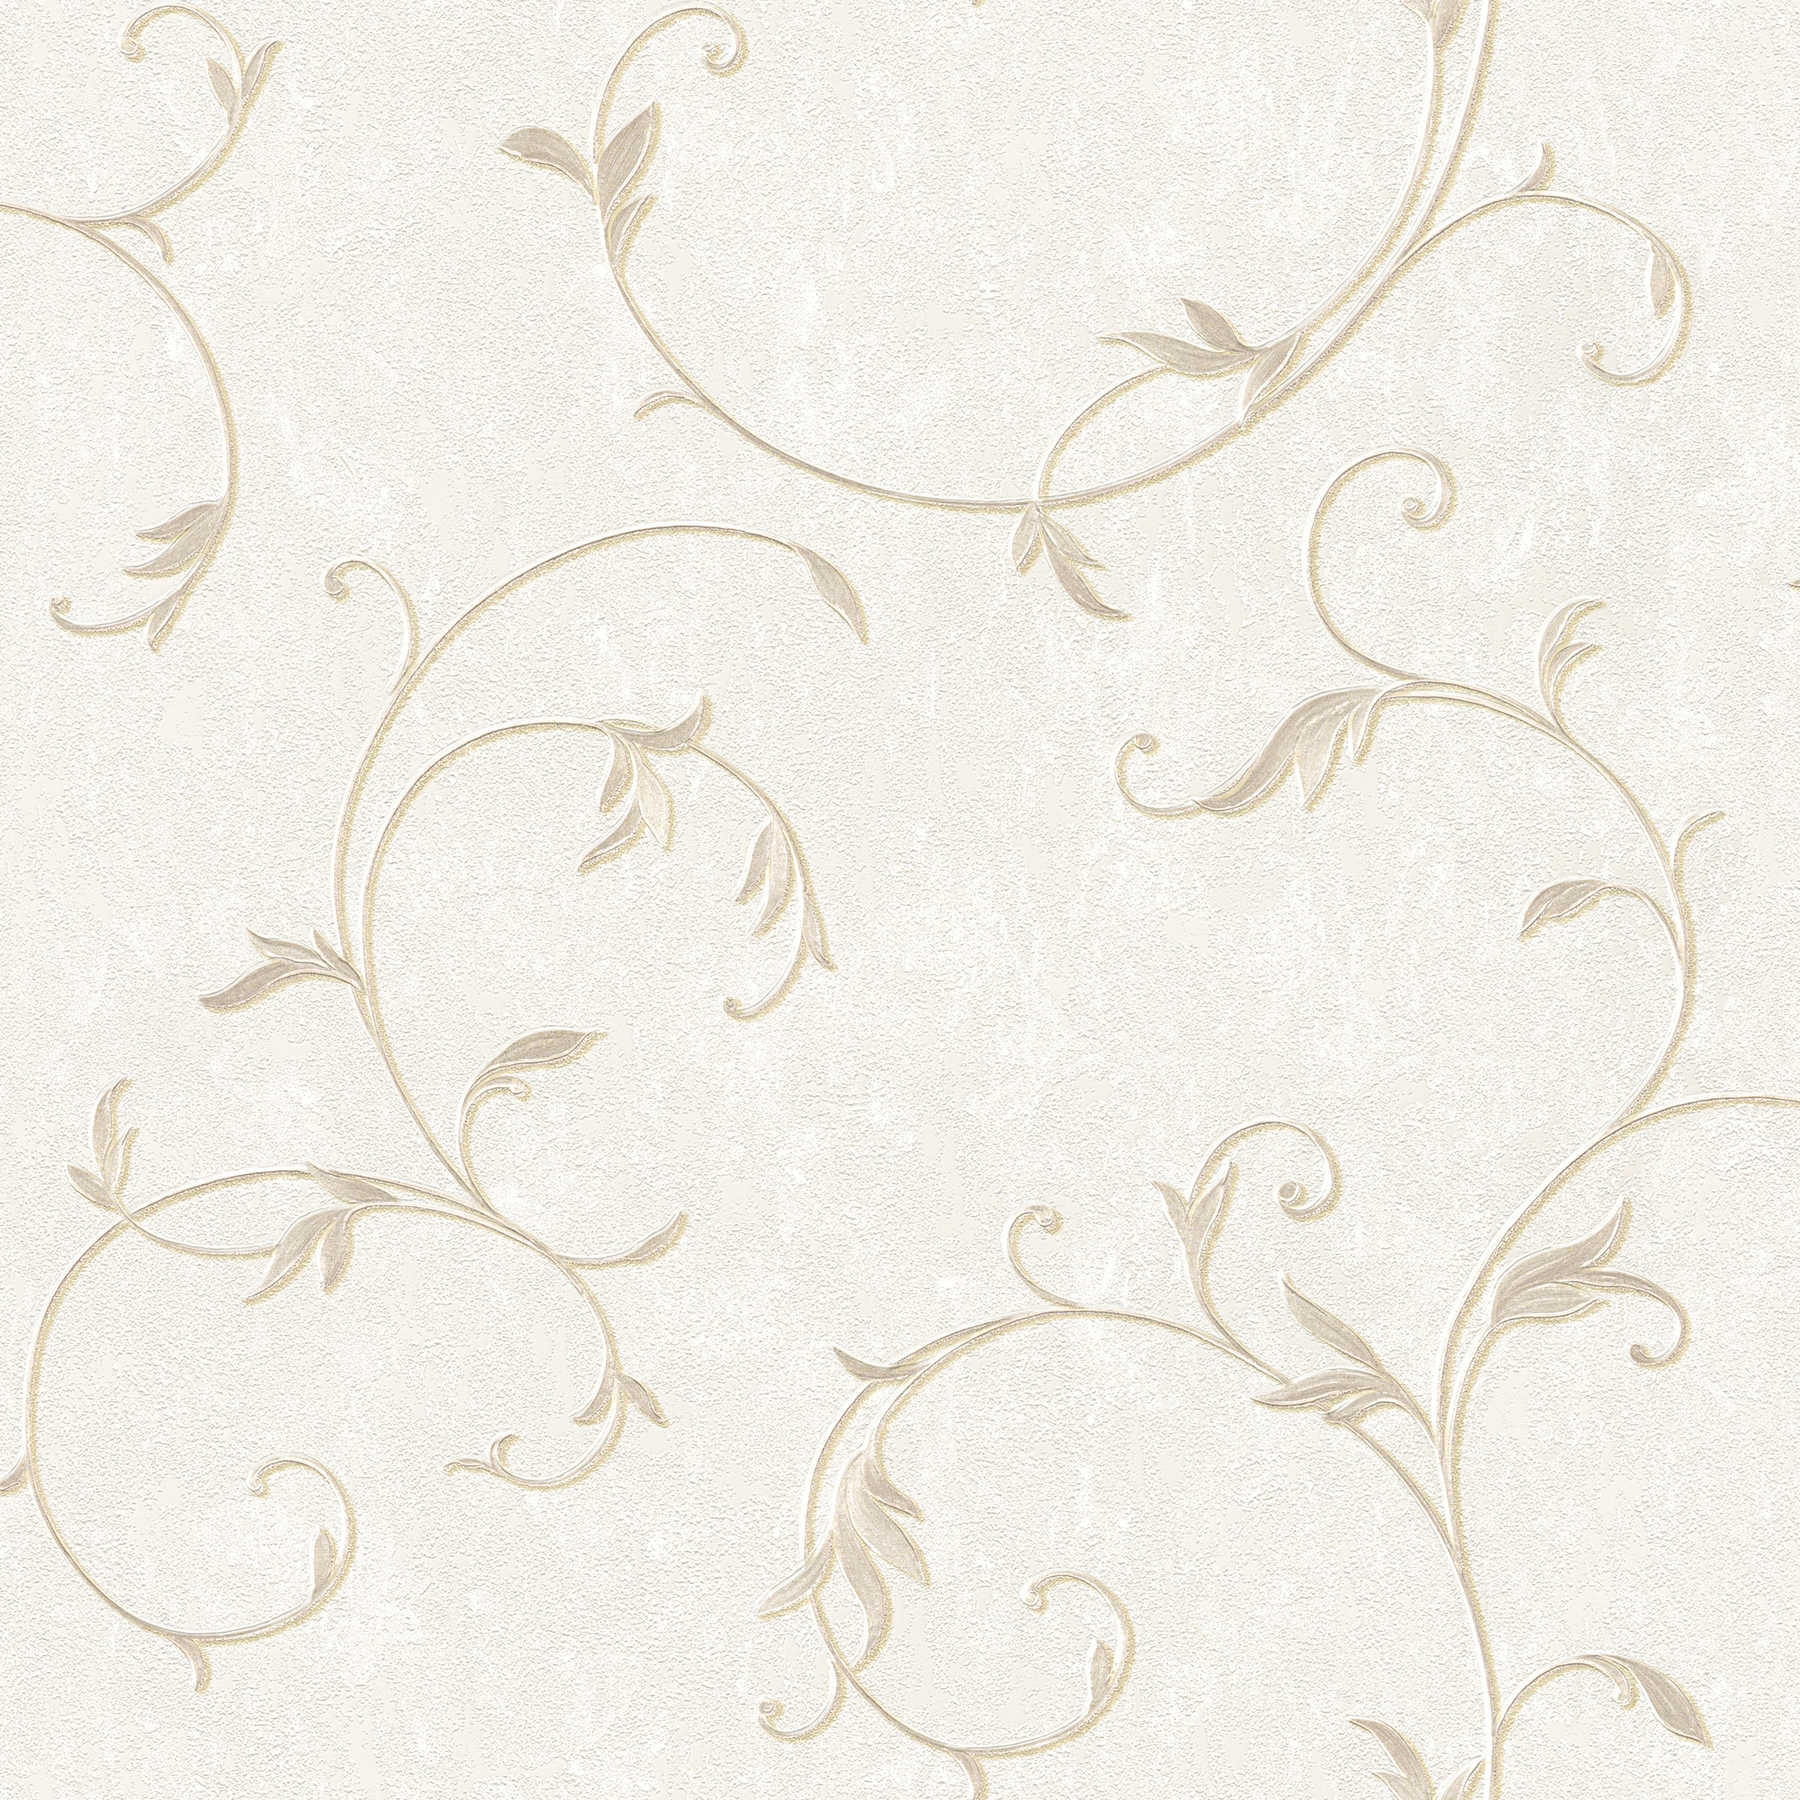 Non-woven wallpaper in plaster look with golden tendril pattern - beige, cream, gold
